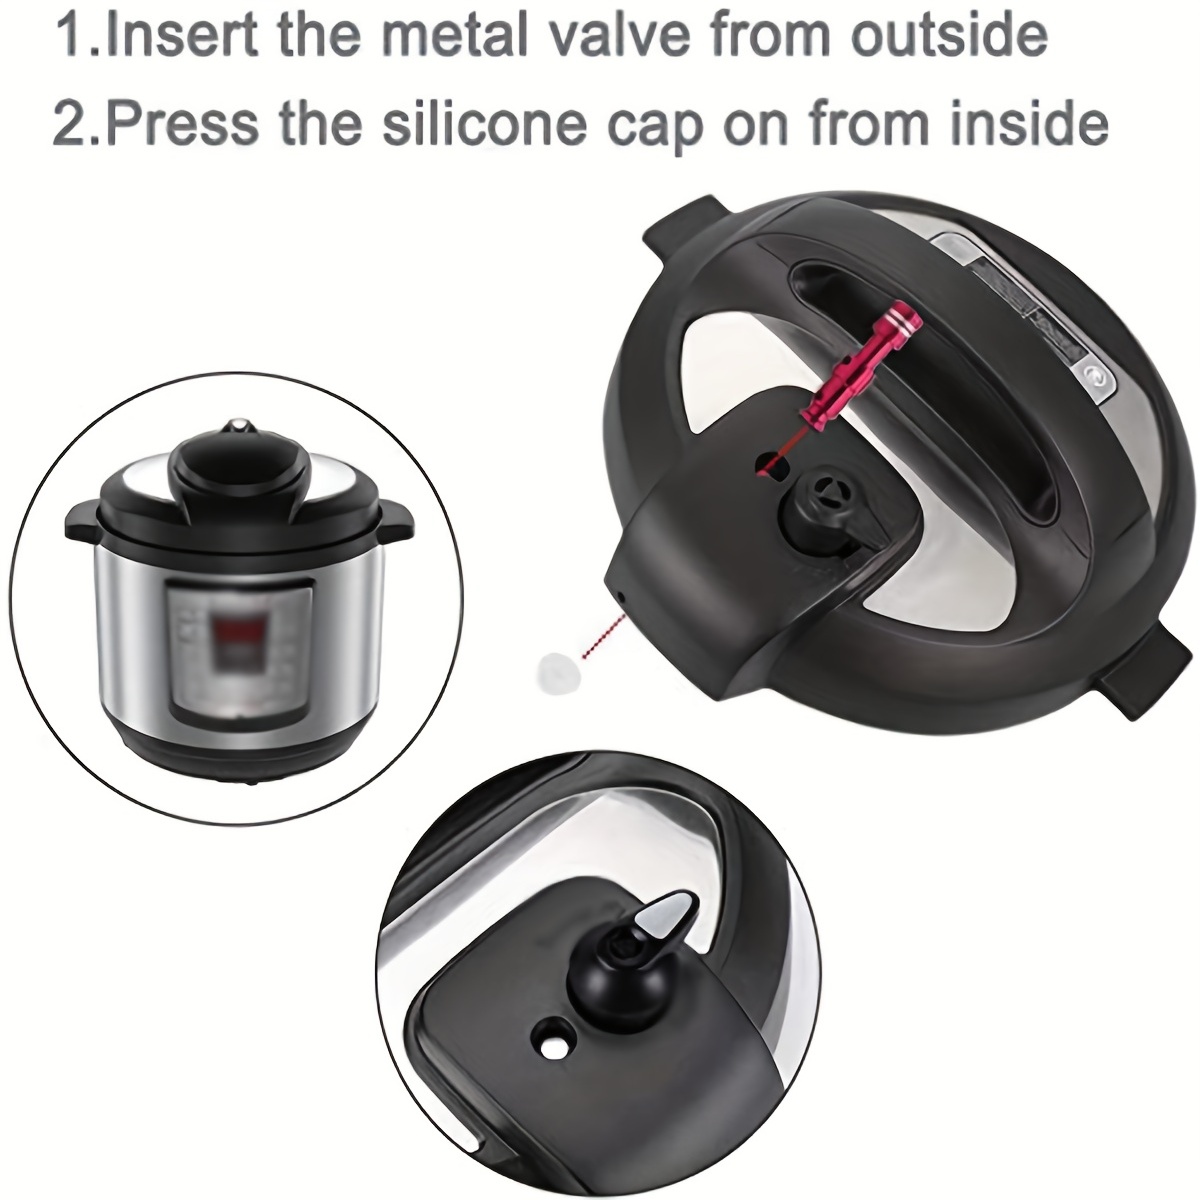 Where can I find replacement parts and accessories for Instant Pot